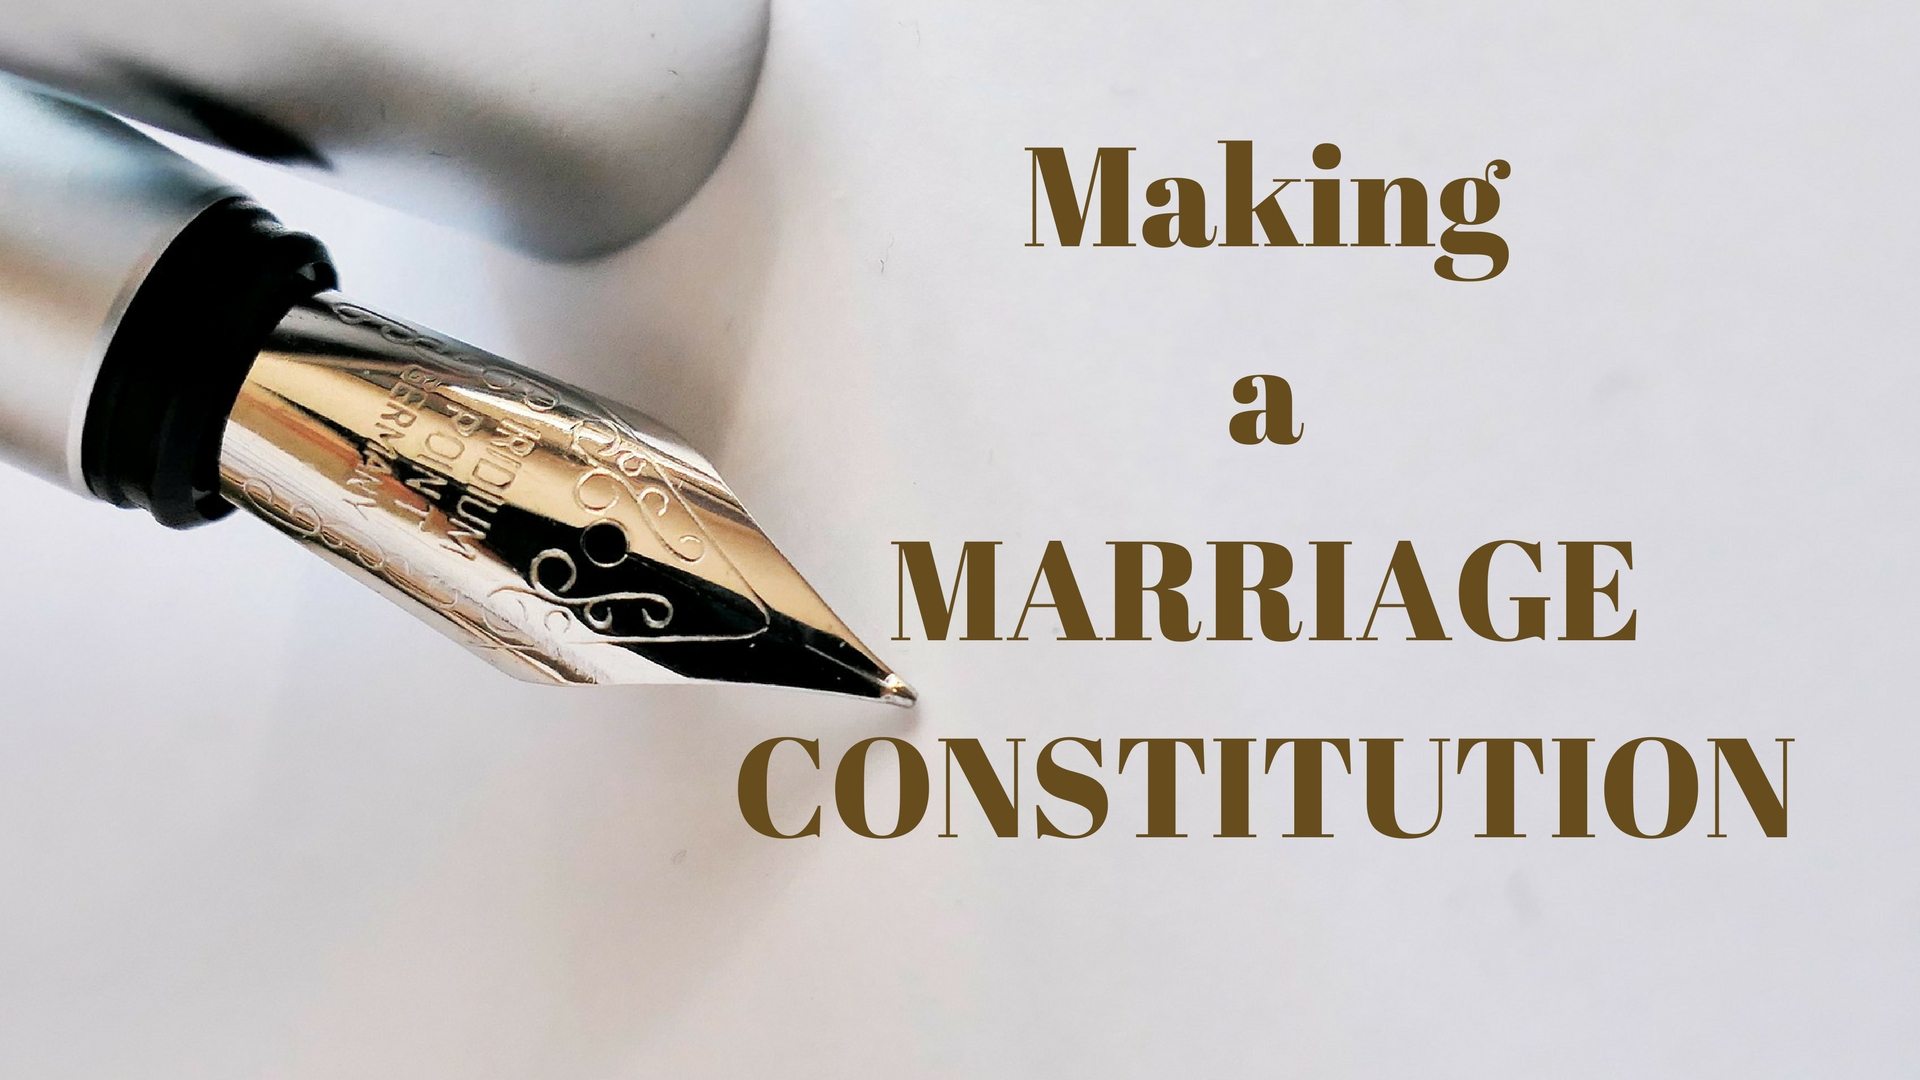 Making a Marriage Constitution Pixabay - Canva